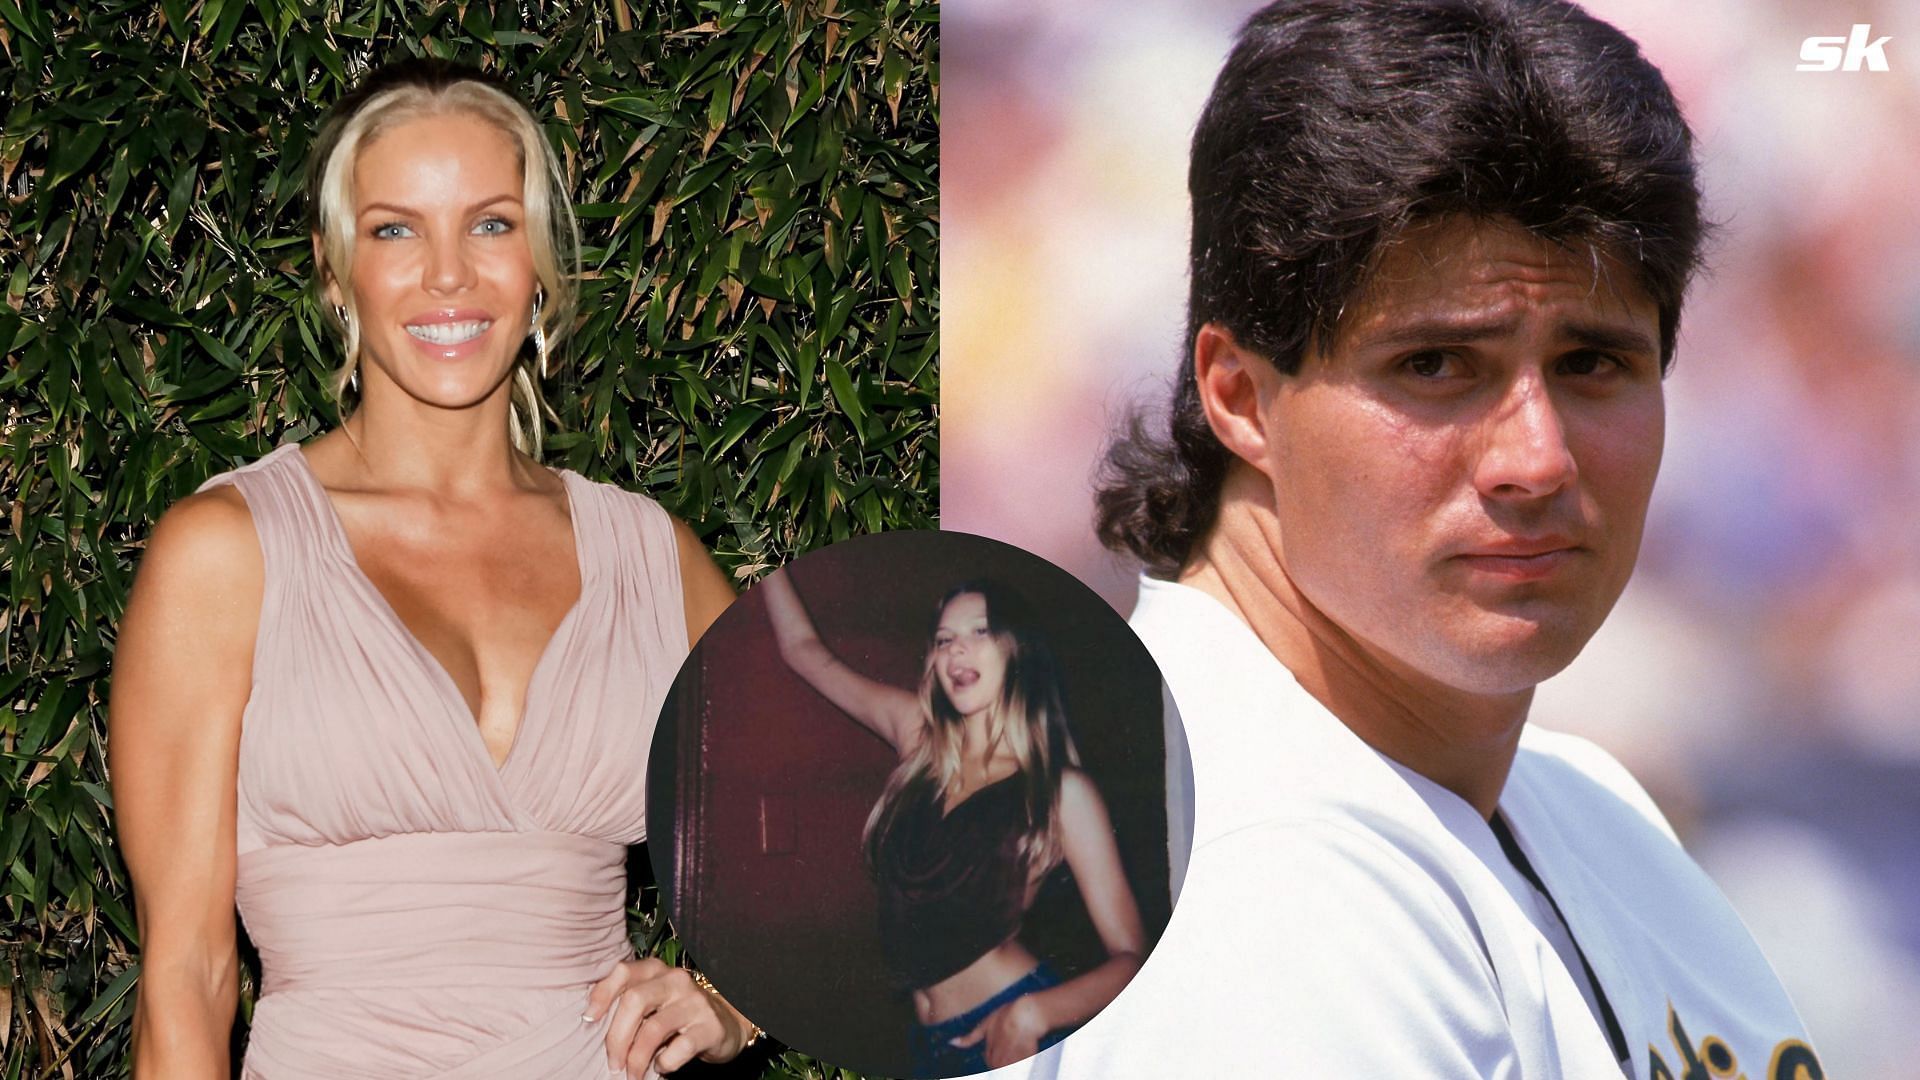 Jessica Canseco, ex-wife of Jose Canseco; Former Oakland Athletics star, Jose Canseco; Jessica and Jose